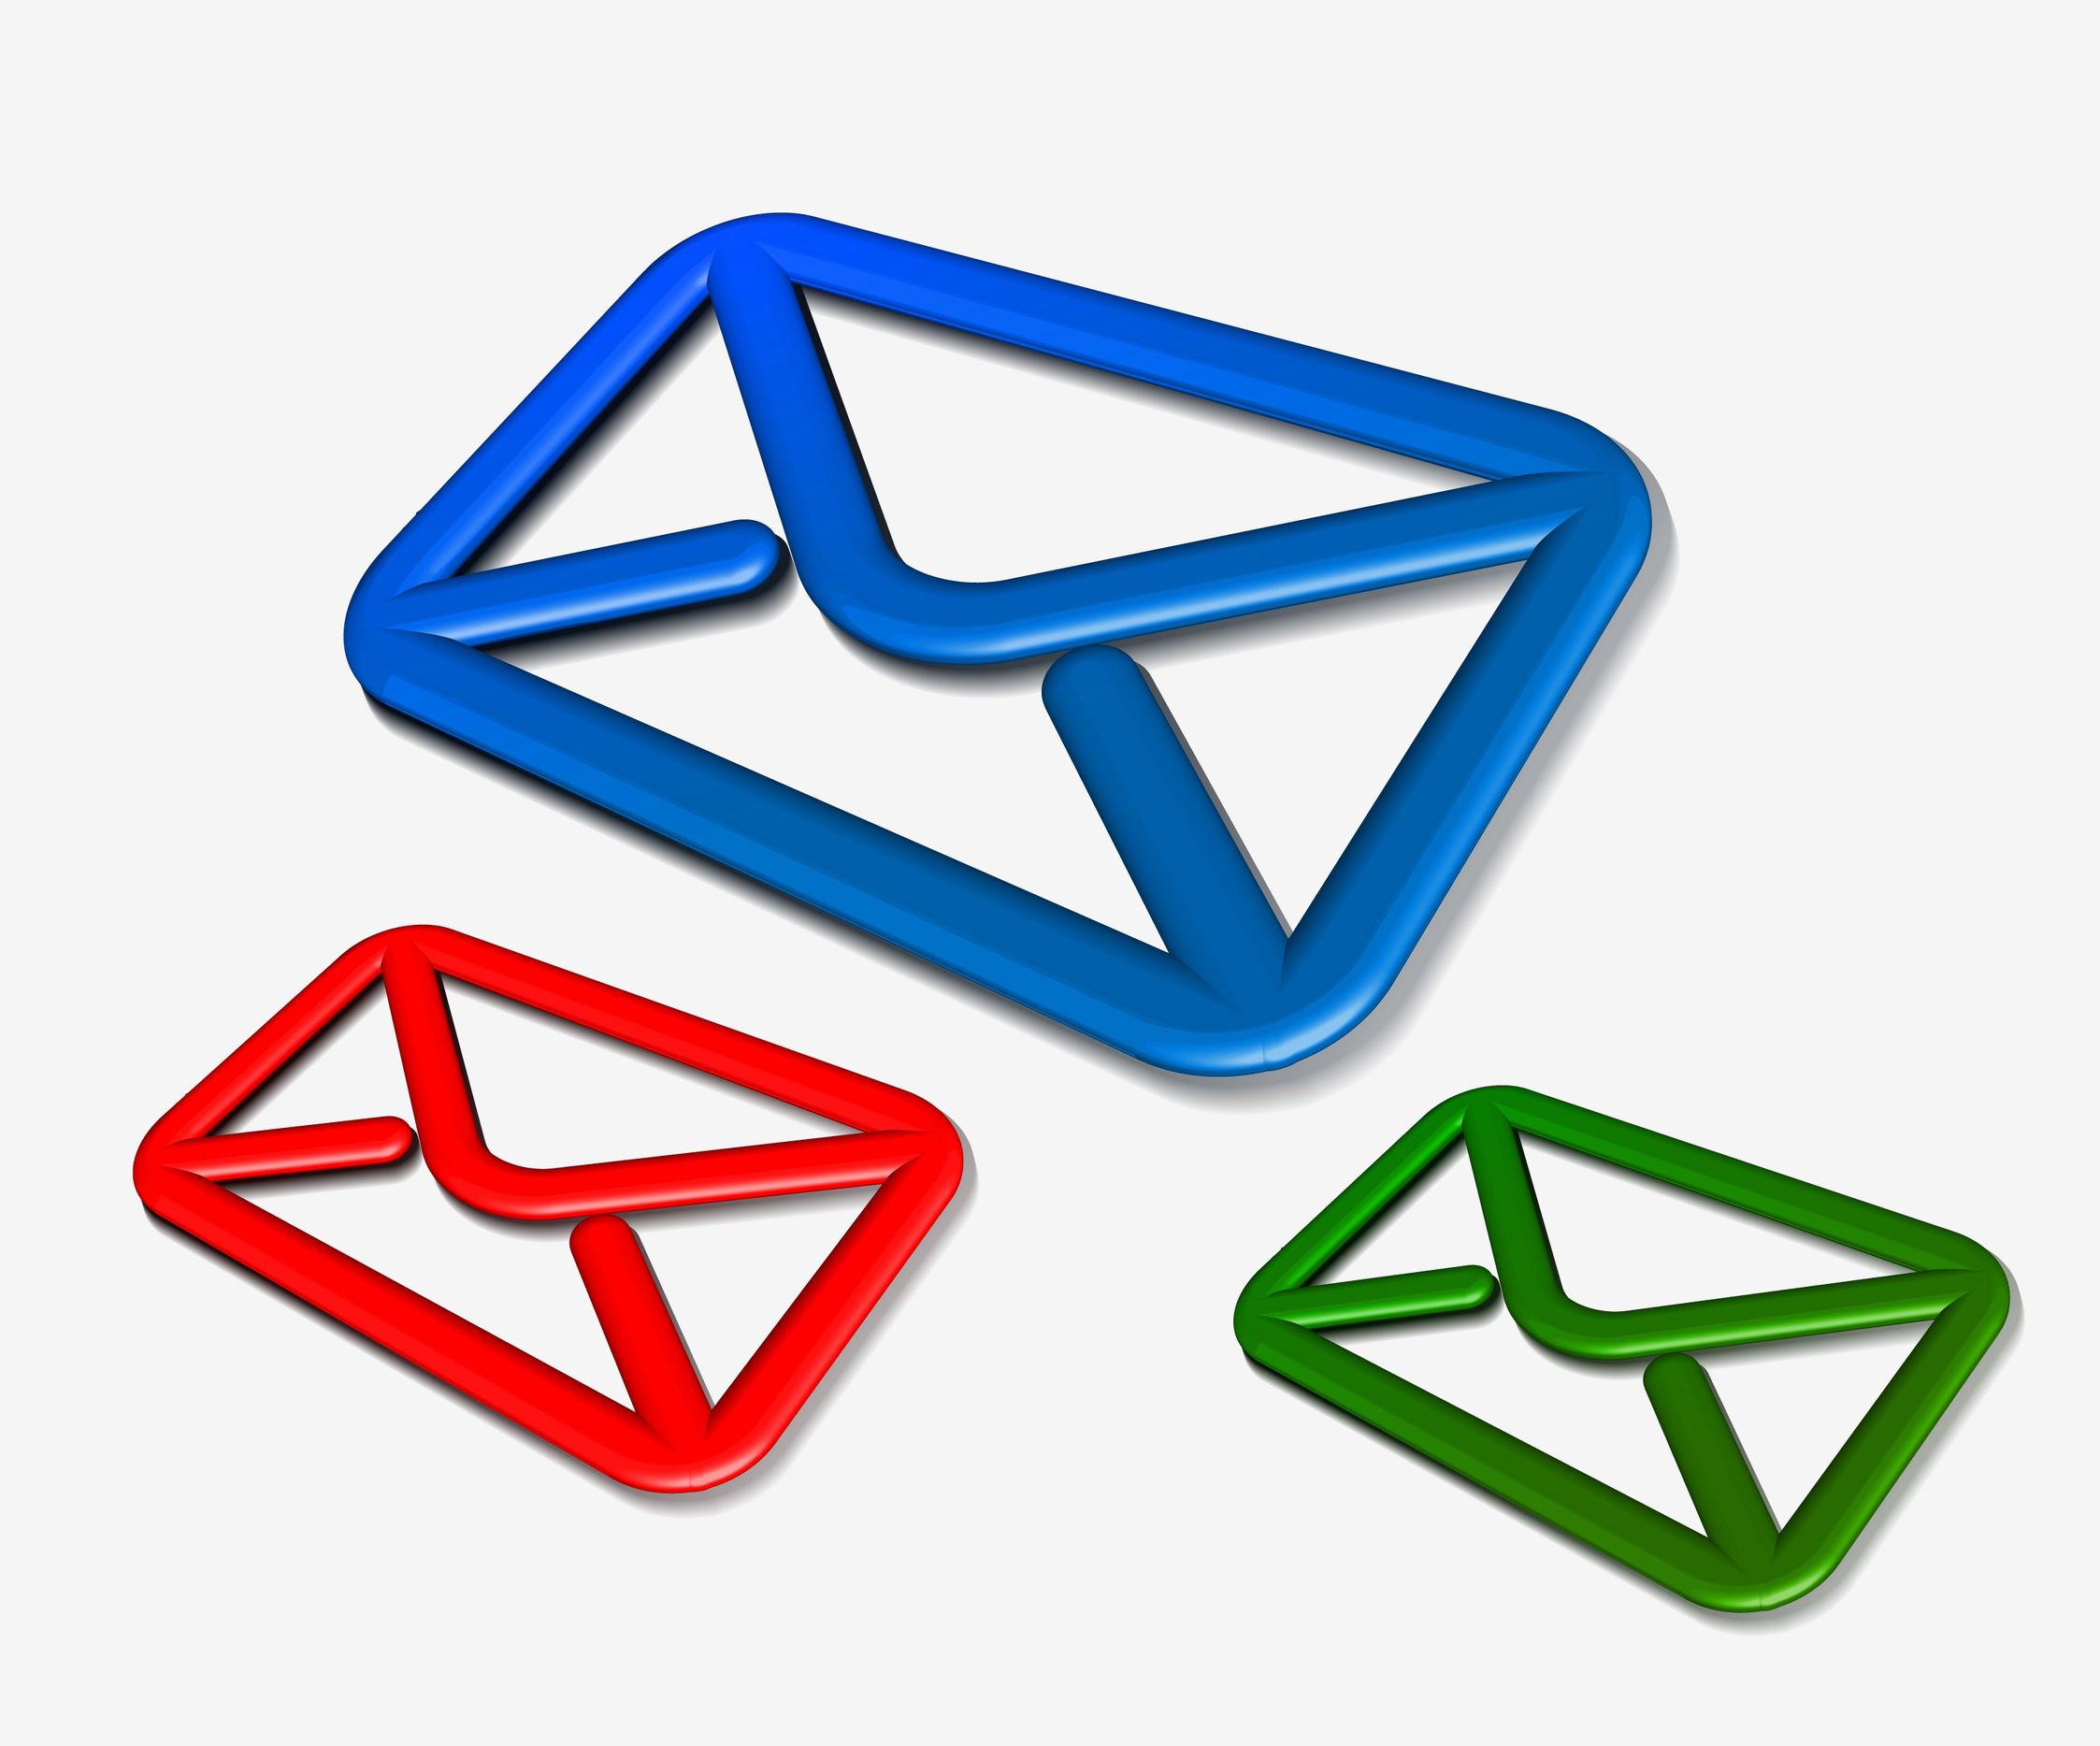 No-cost email tools